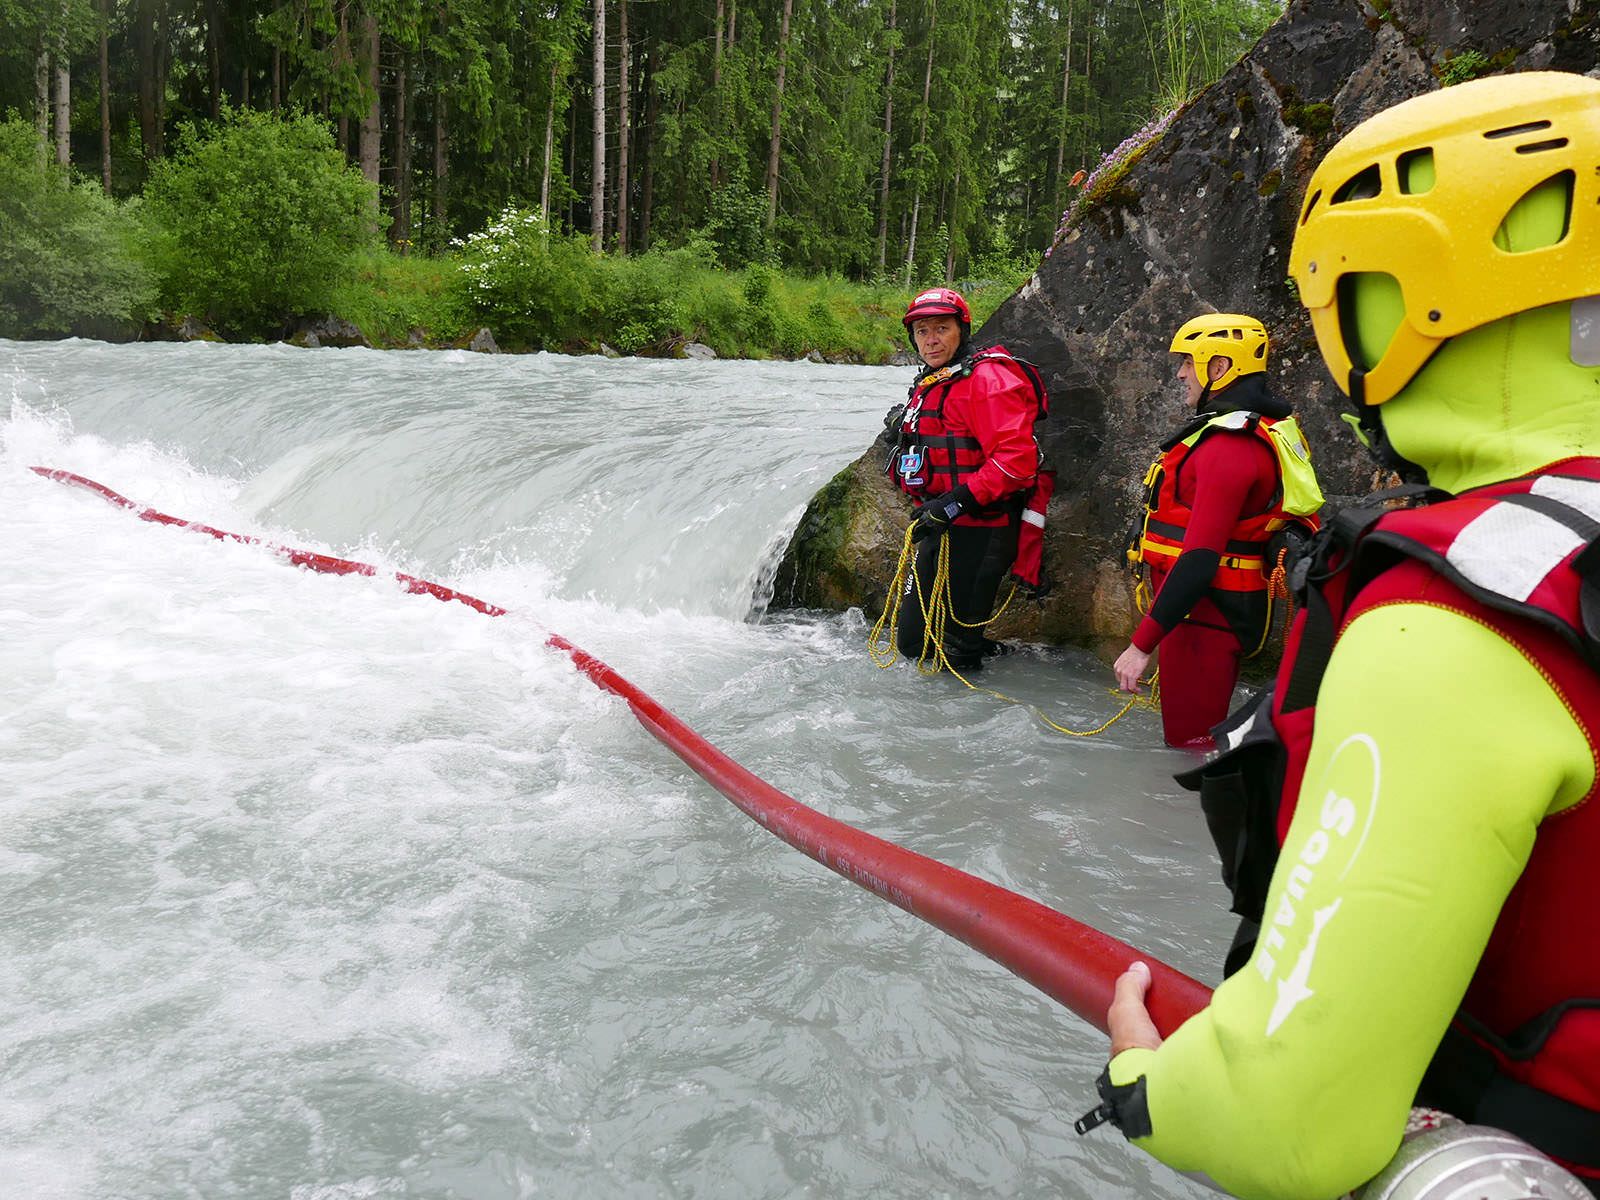 Inflated Firehose / Rescue from bridges / Chanels